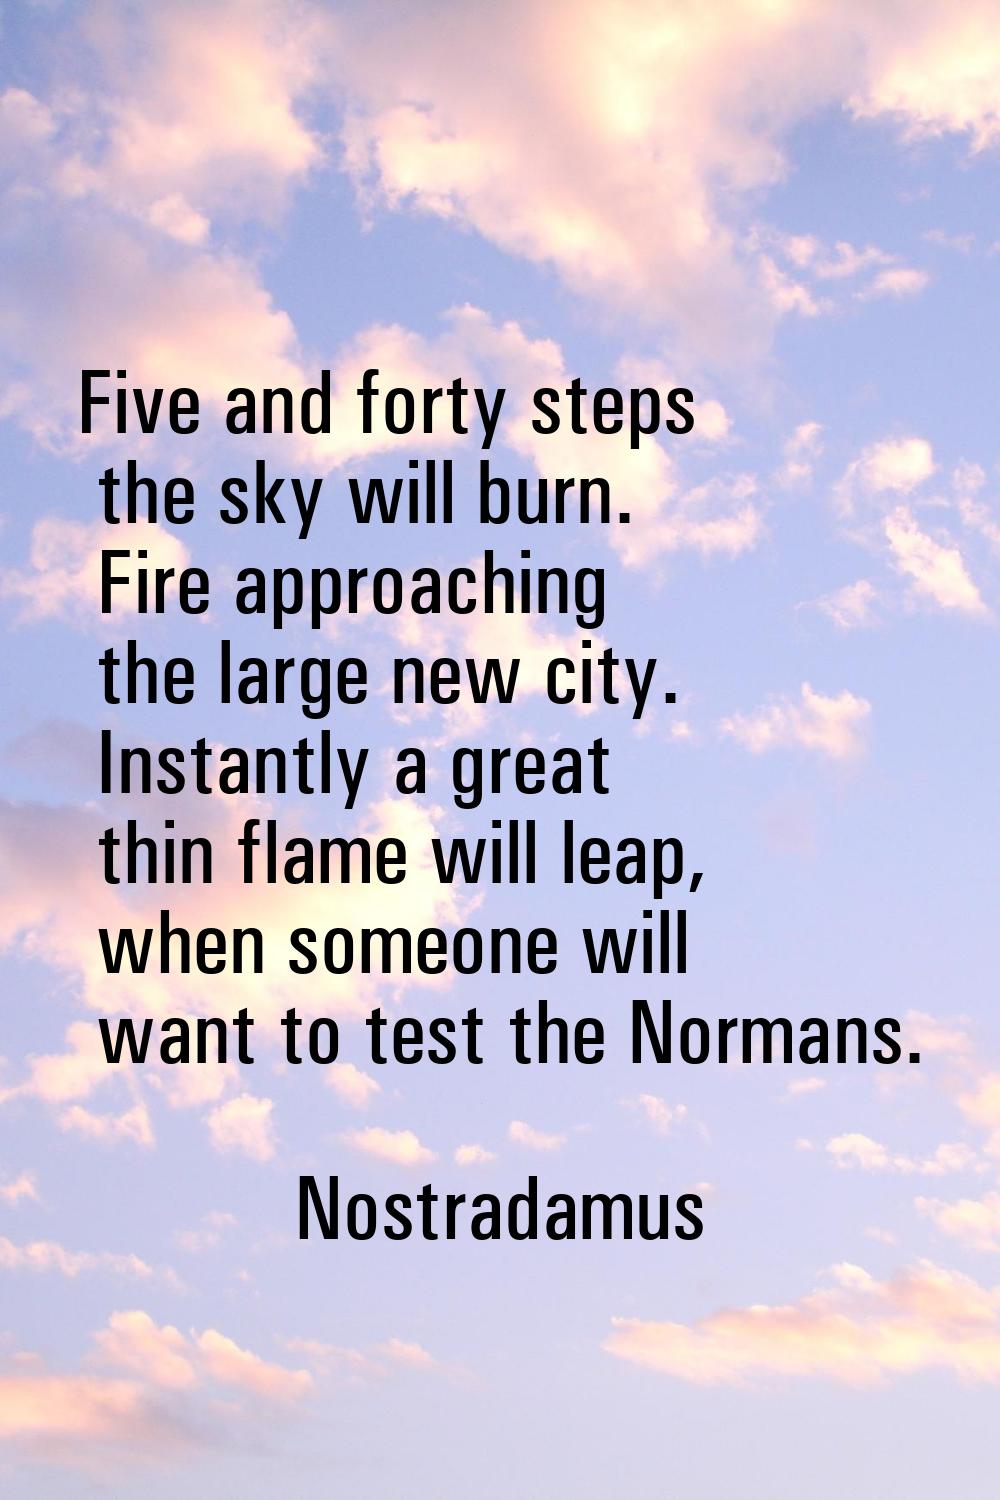 Five and forty steps the sky will burn. Fire approaching the large new city. Instantly a great thin